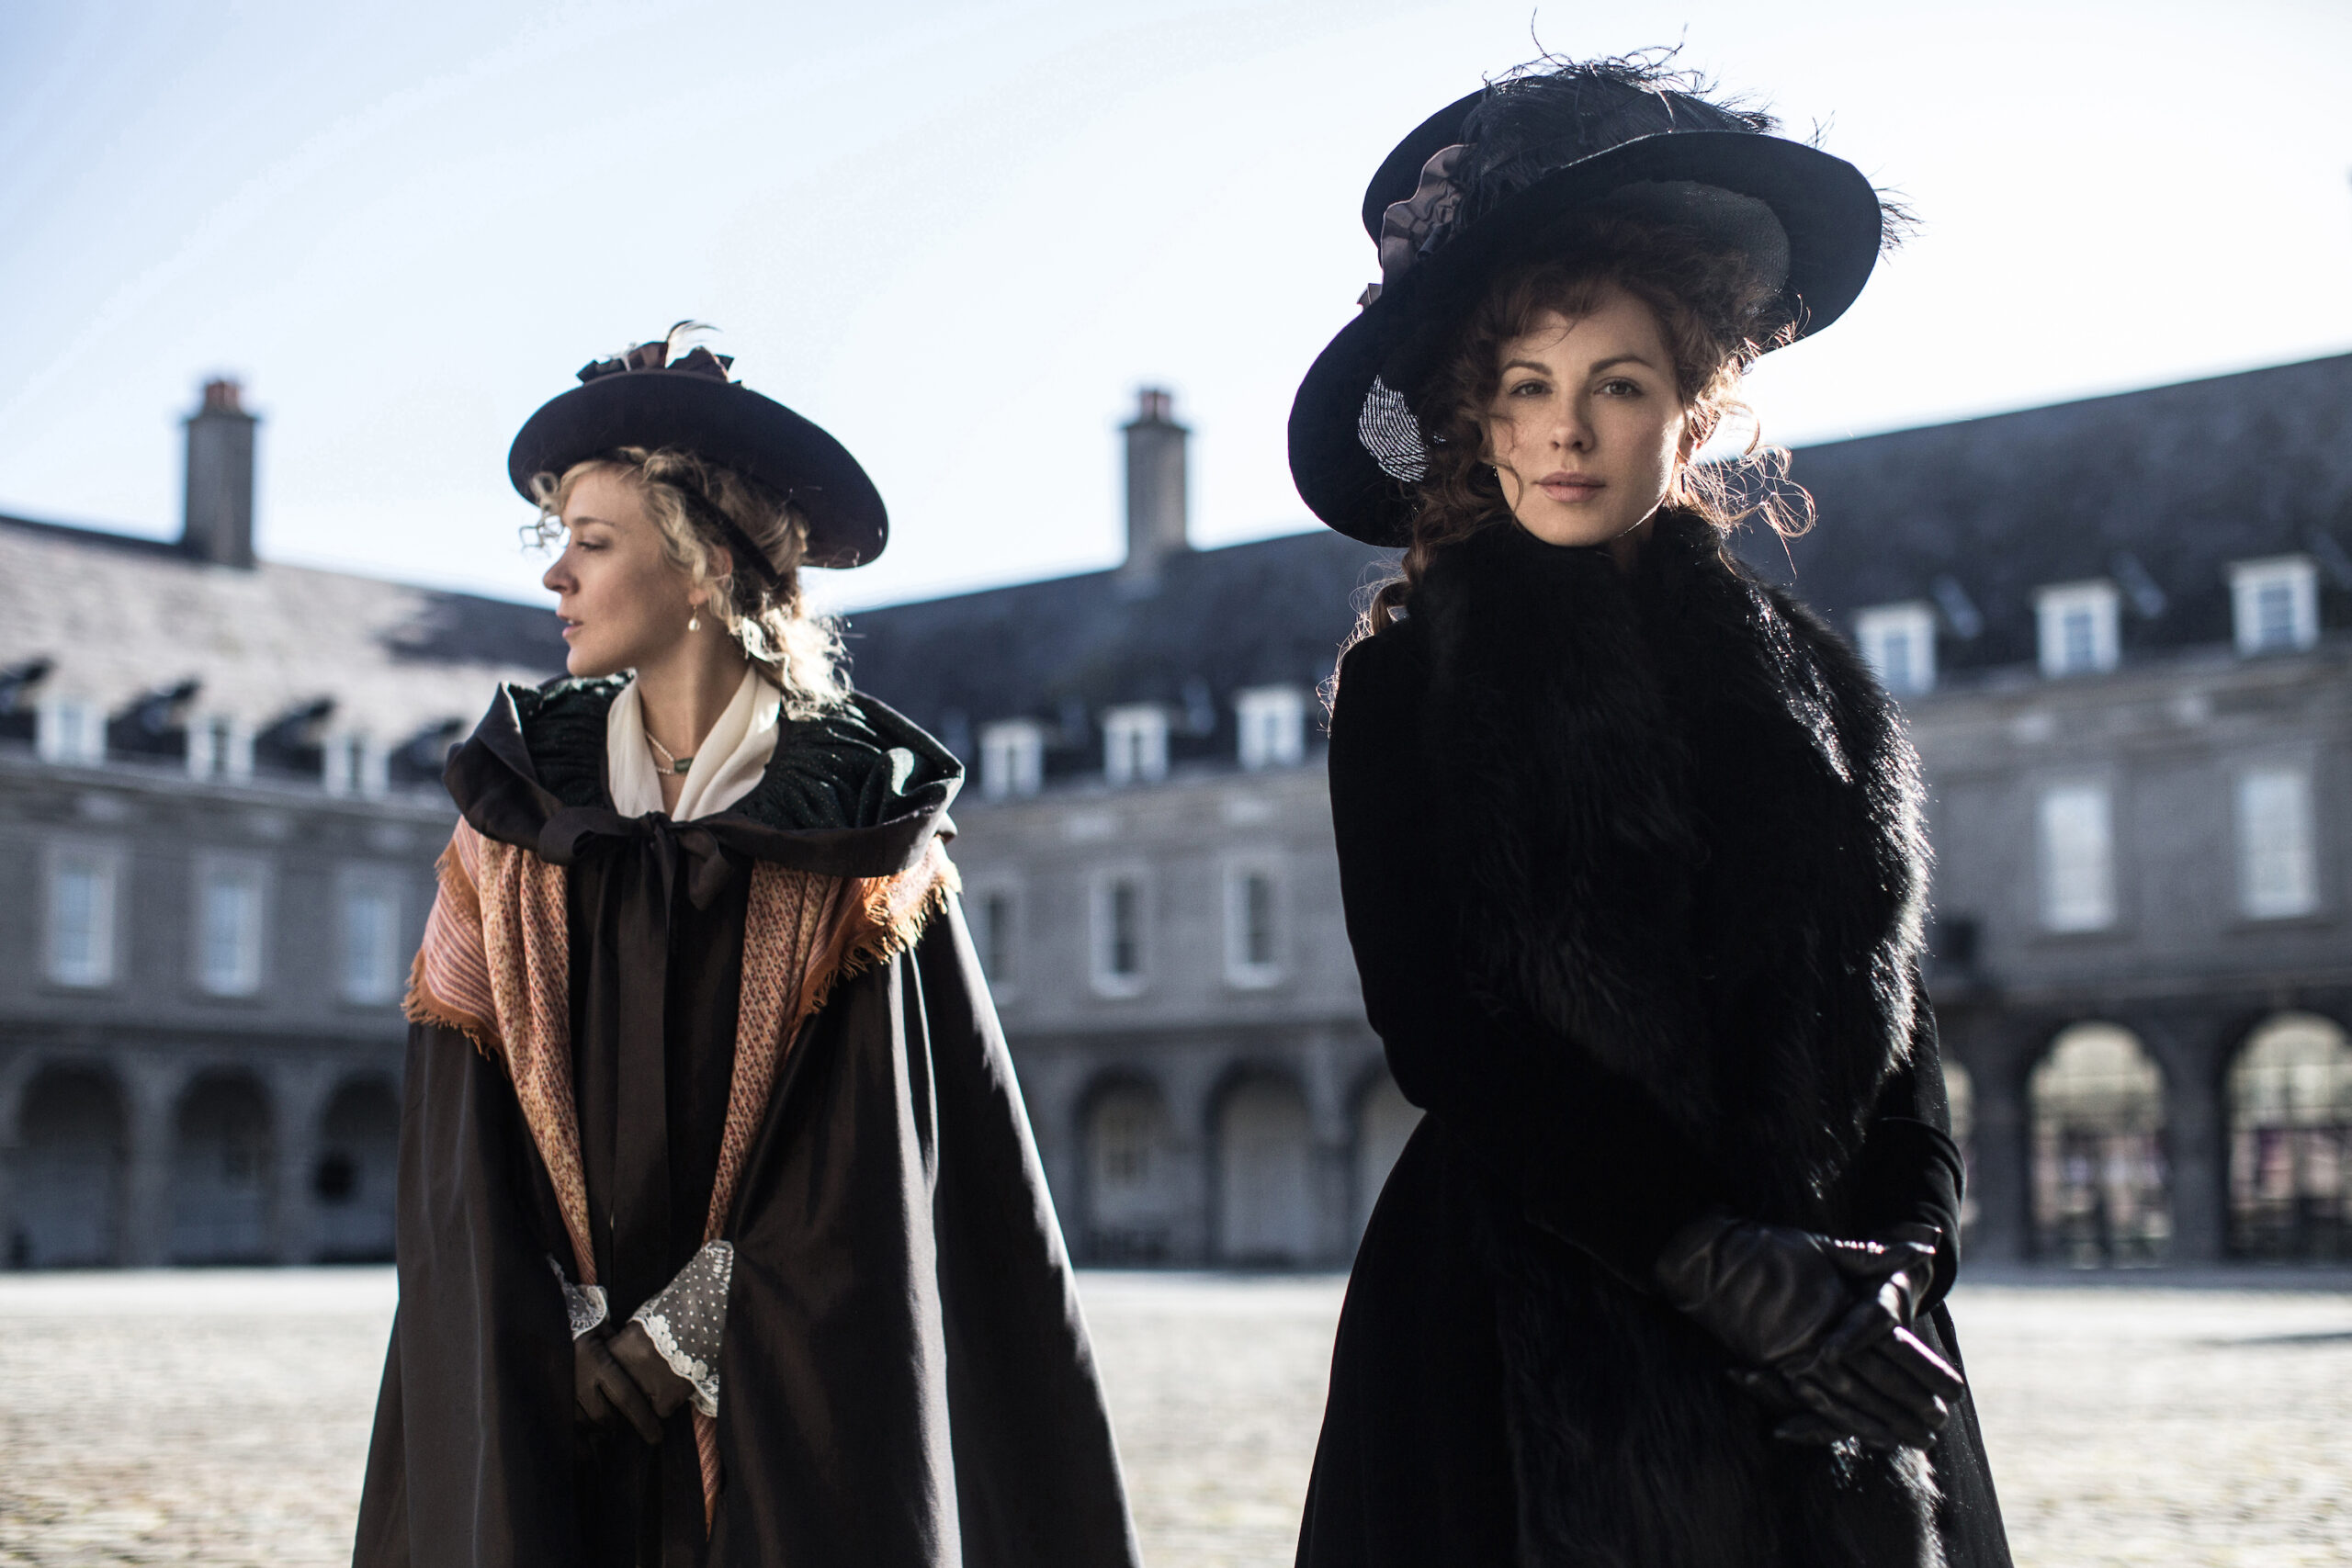 Location images of Love & Friendship, a Jane Austen film adaptation starring Kate Bekinsdale and Chloe Sevigny, directed by Whit Stillman. CHURCHILL PRODUCTIONS LIMITED. Producers Katie Holly, Whit Stillman, Lauranne Bourrachot. Co-Producer Raymond Van Der Kaaij. Also Starring: Xavier Samuel, Emma Greenwell & Morfydd Clark. Photo credit: Ross McDonnell. Photo courtesy: Sundance Film Institute